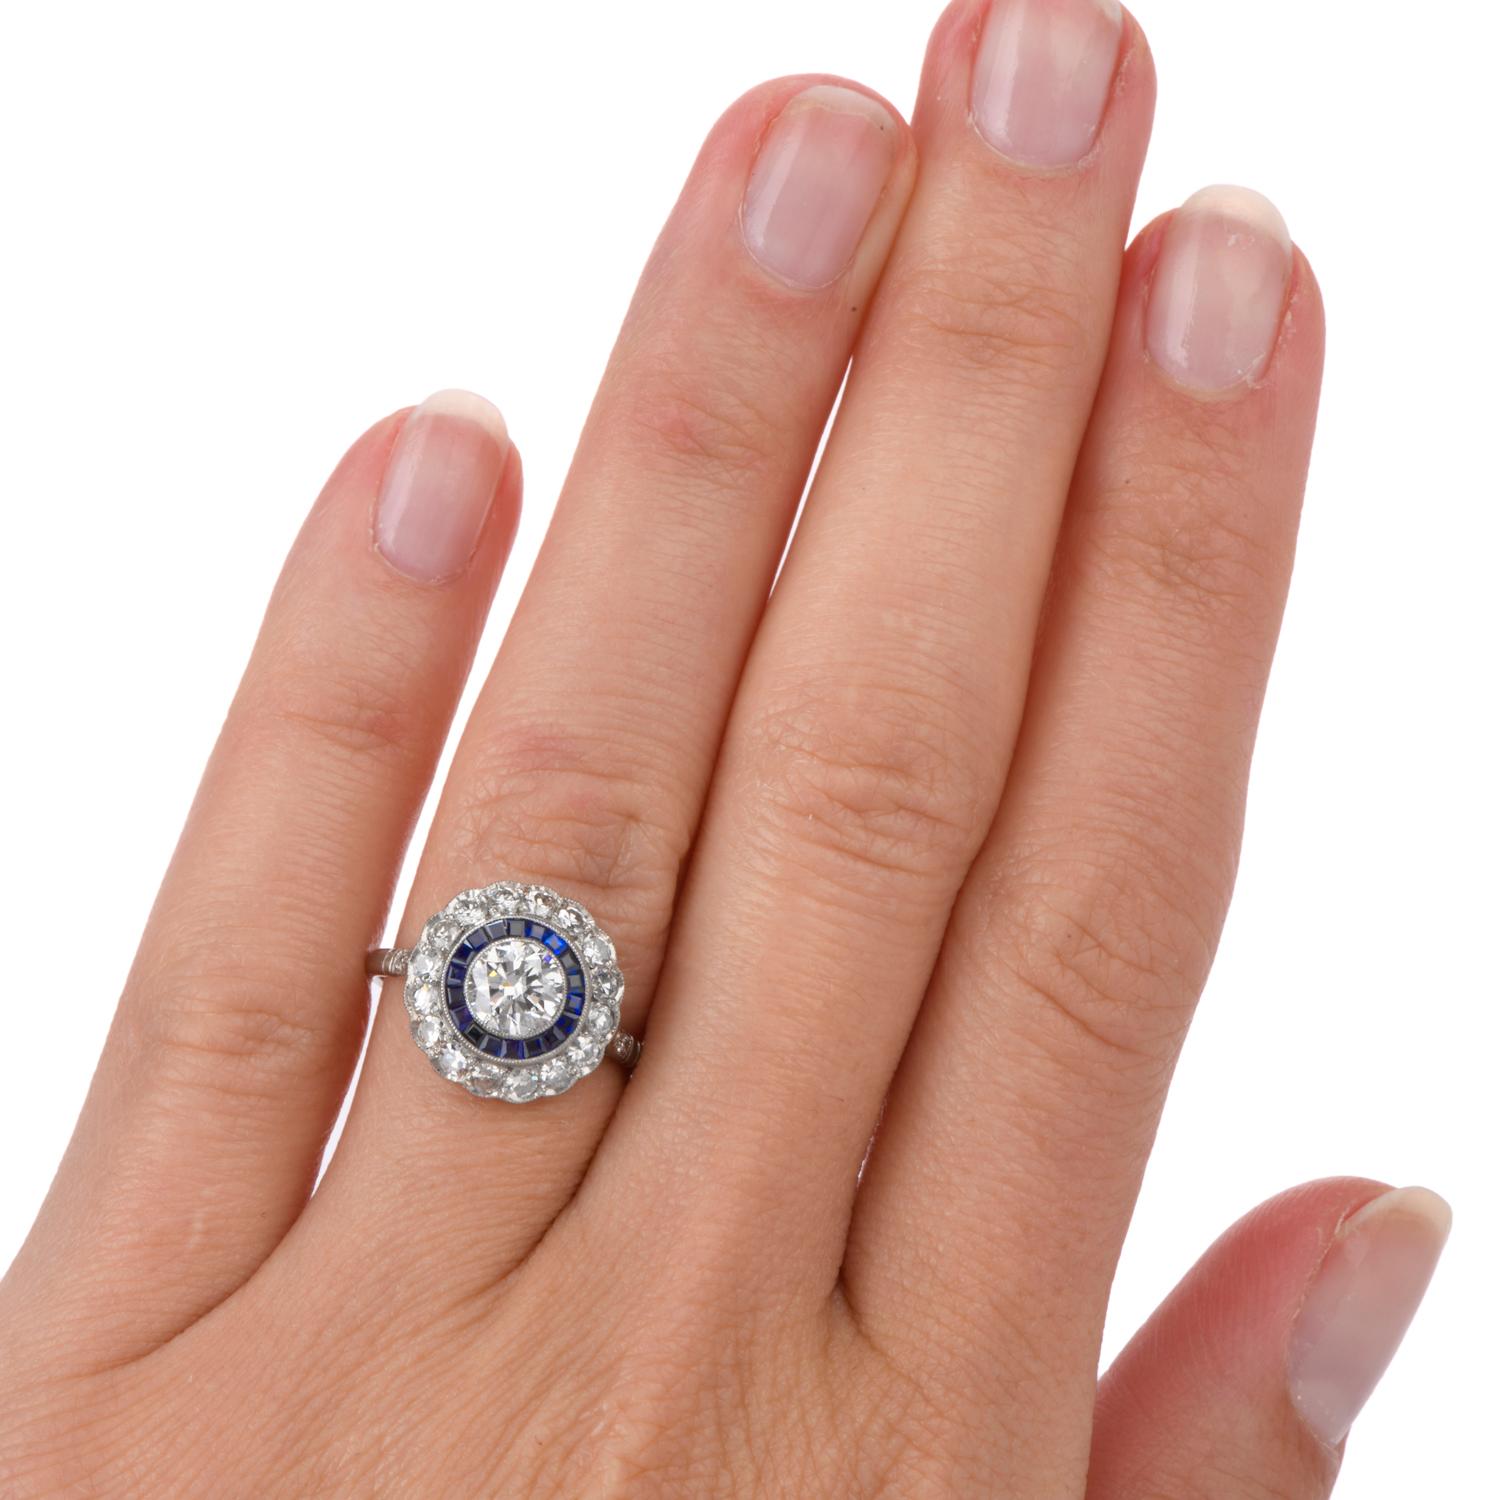 This right hand engagement or Cocktail Ring was inspired in a Double Halo

and crafted in Platinum. A bright white round brilliant cut Diamond is bezel set in the center with a rings of bezel set Sapphire and prong set round Diamonds surround.